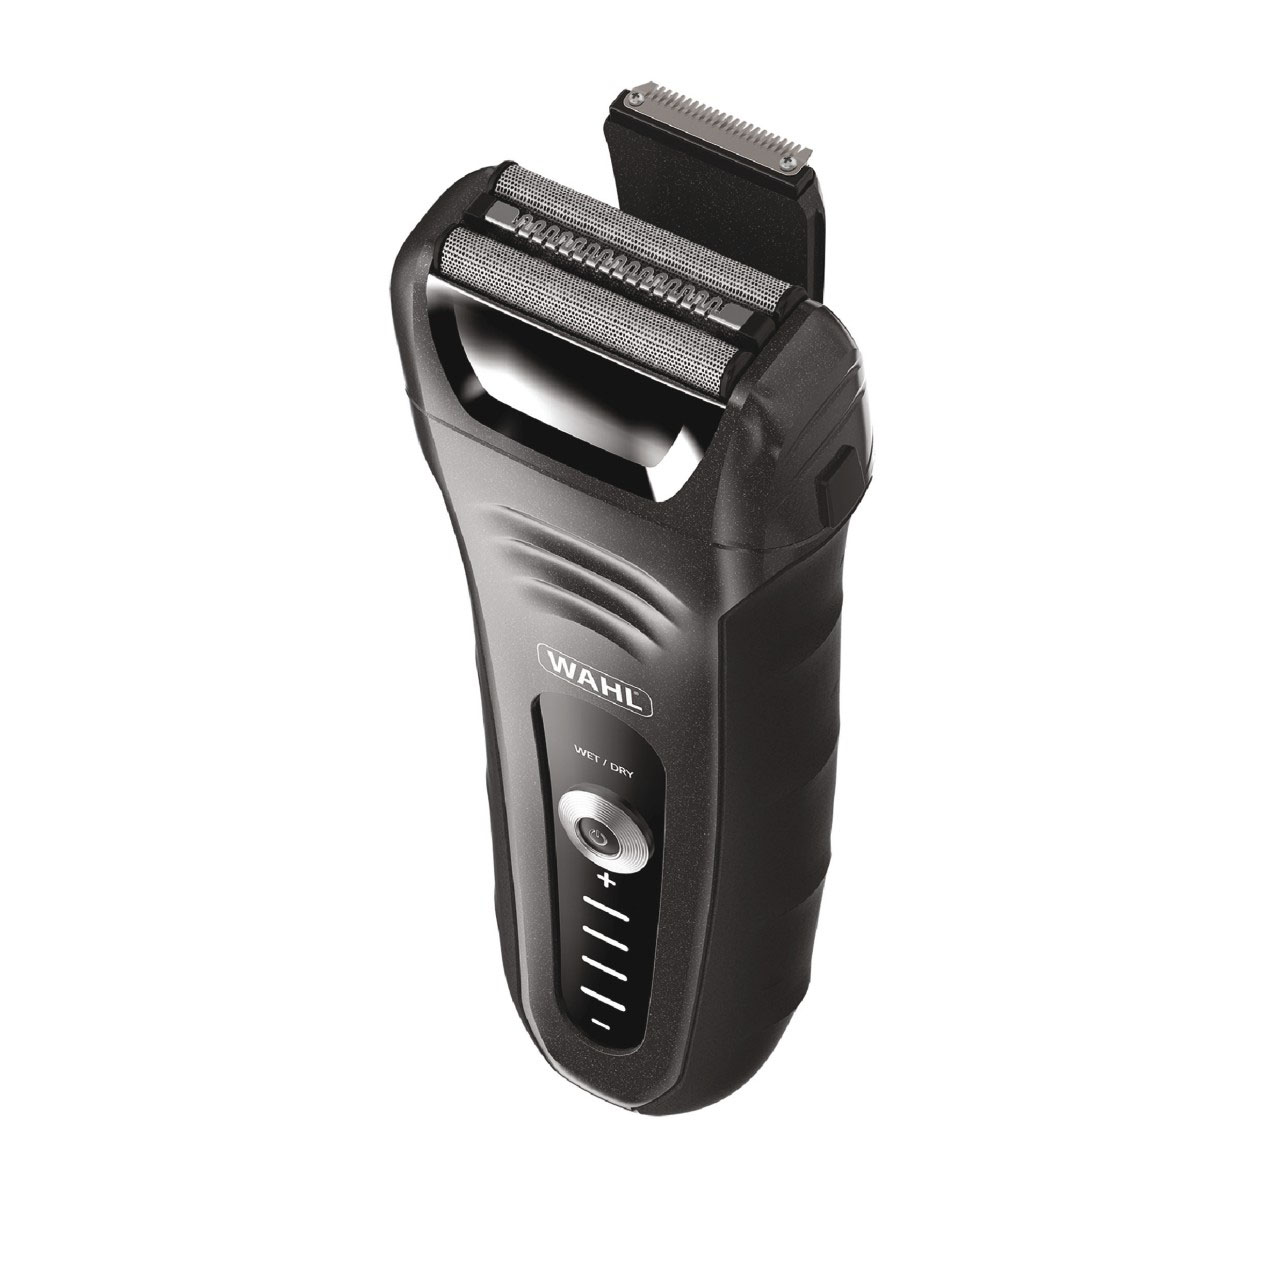 Wahl Lifeproof Plus Wet and Dry Shaver